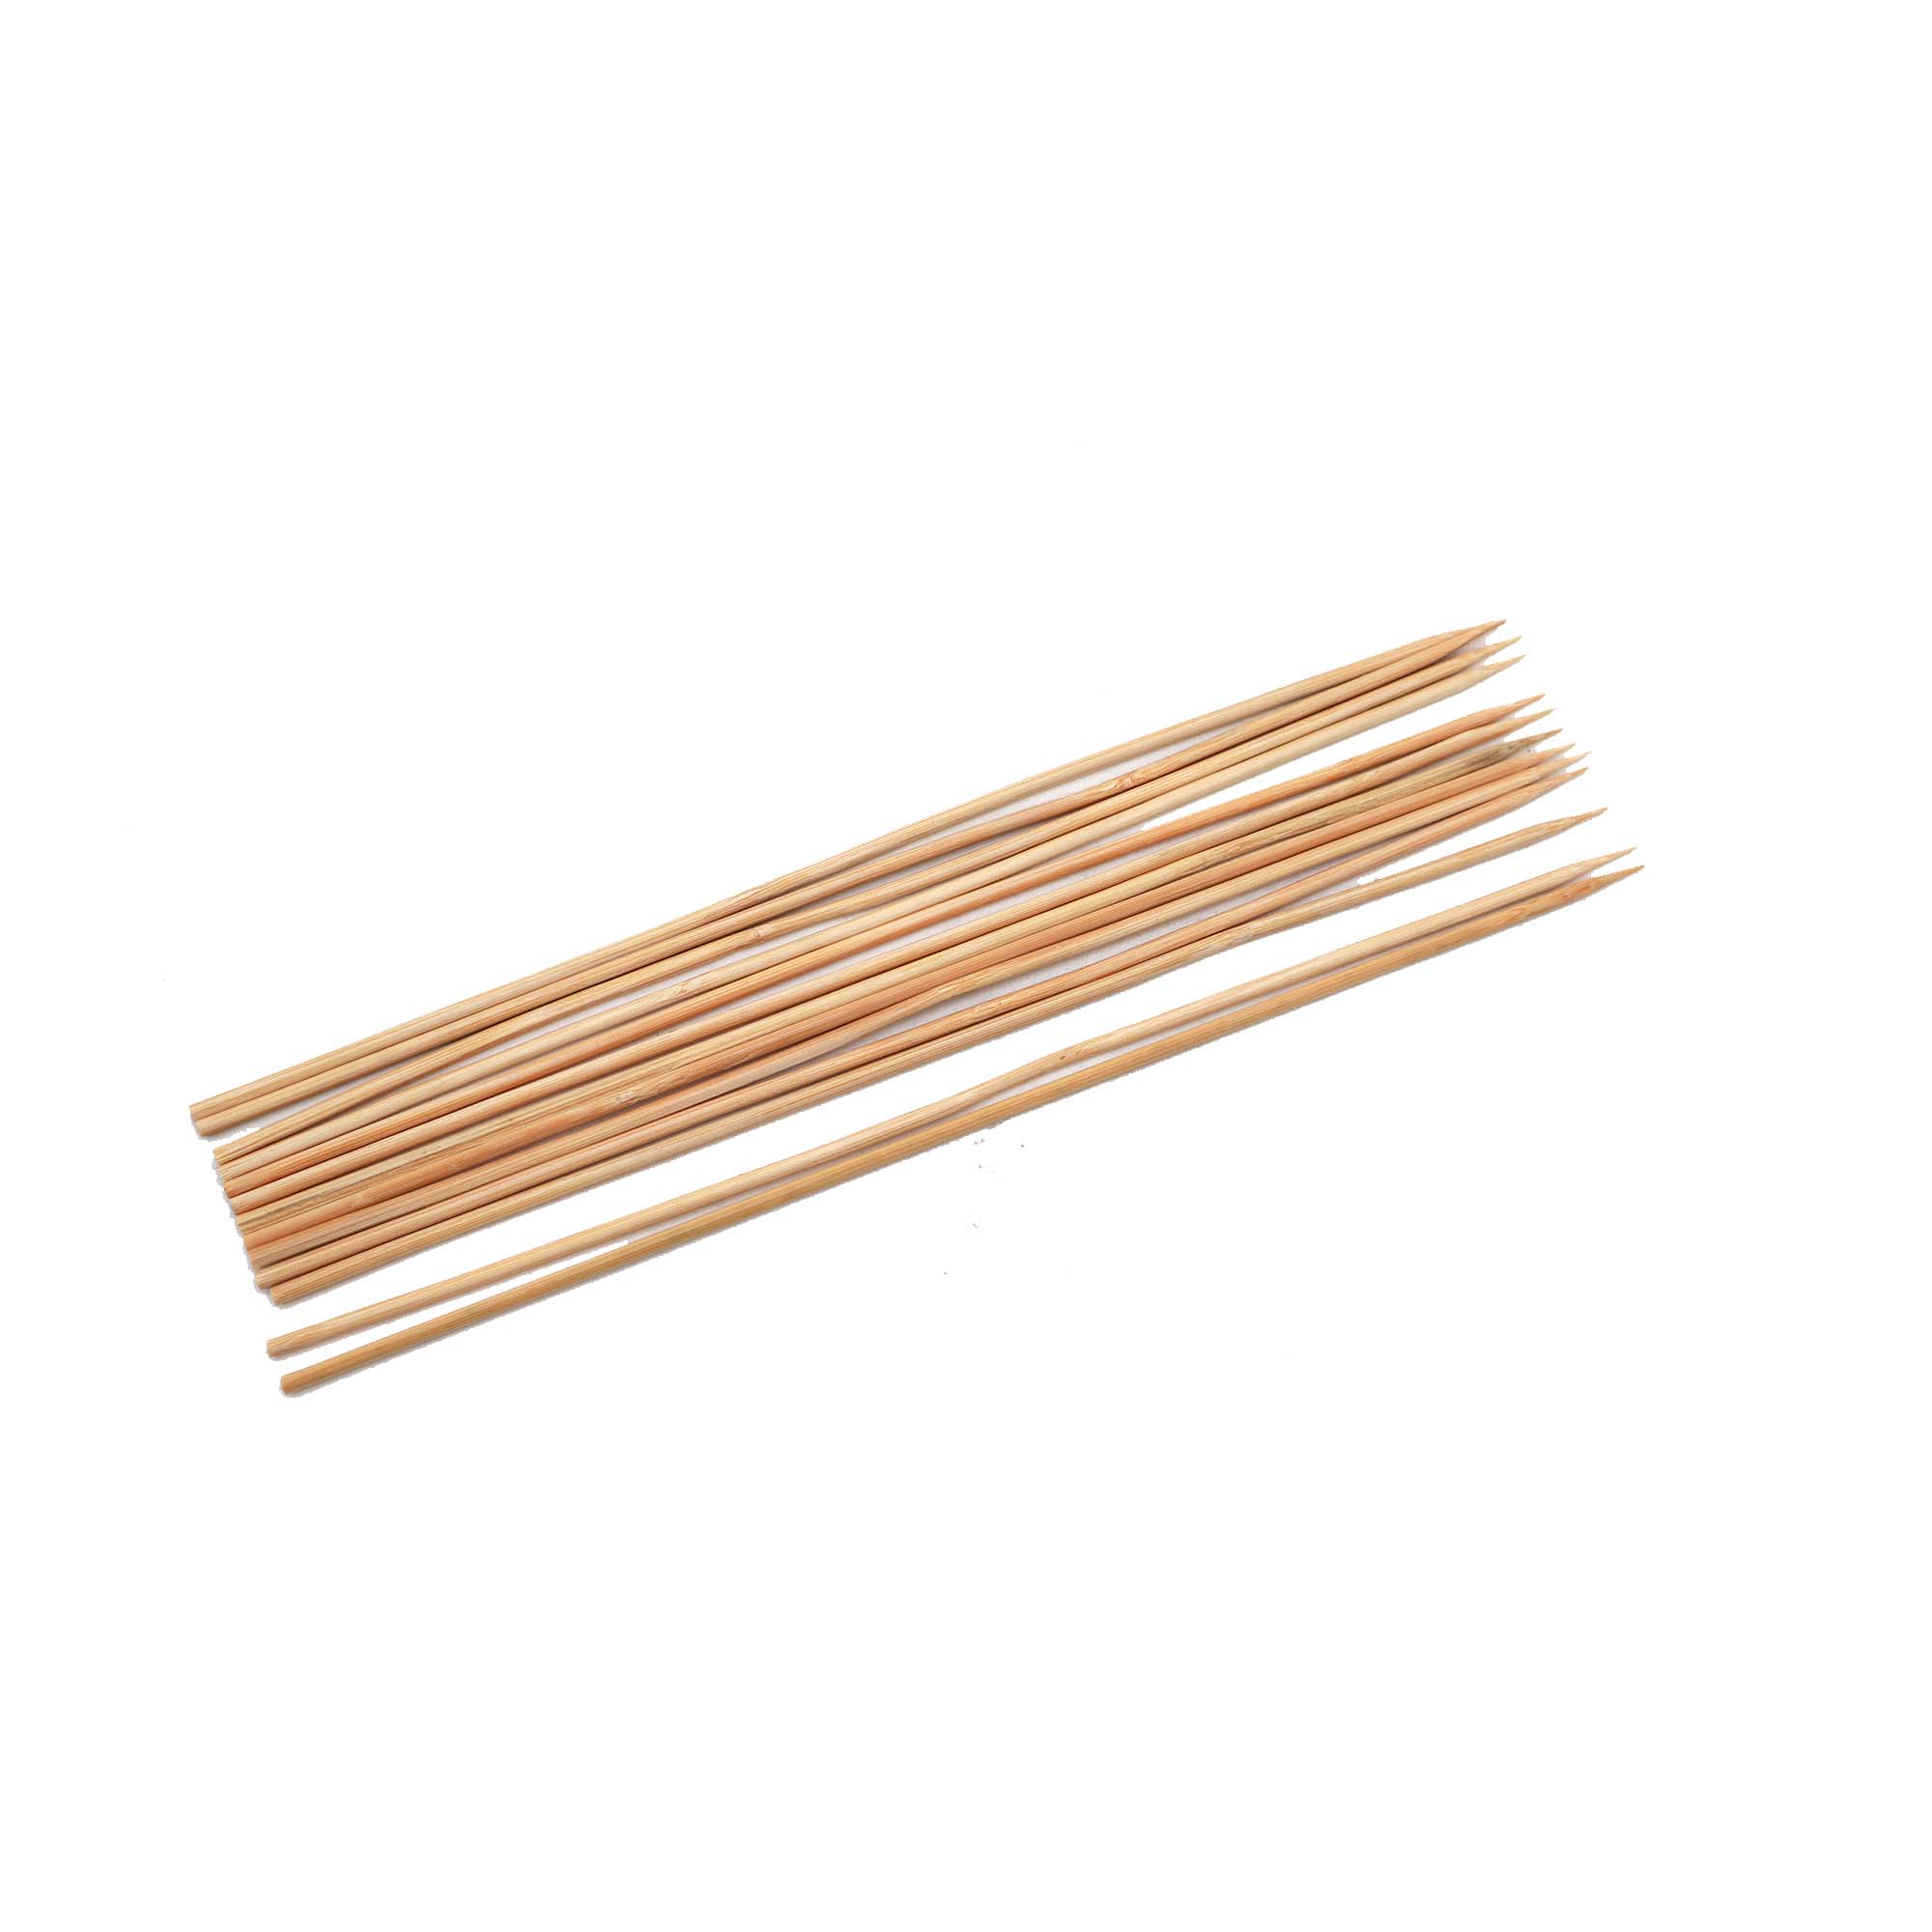 Bamboo Skewers 25cmx3mm 100pc discontinued